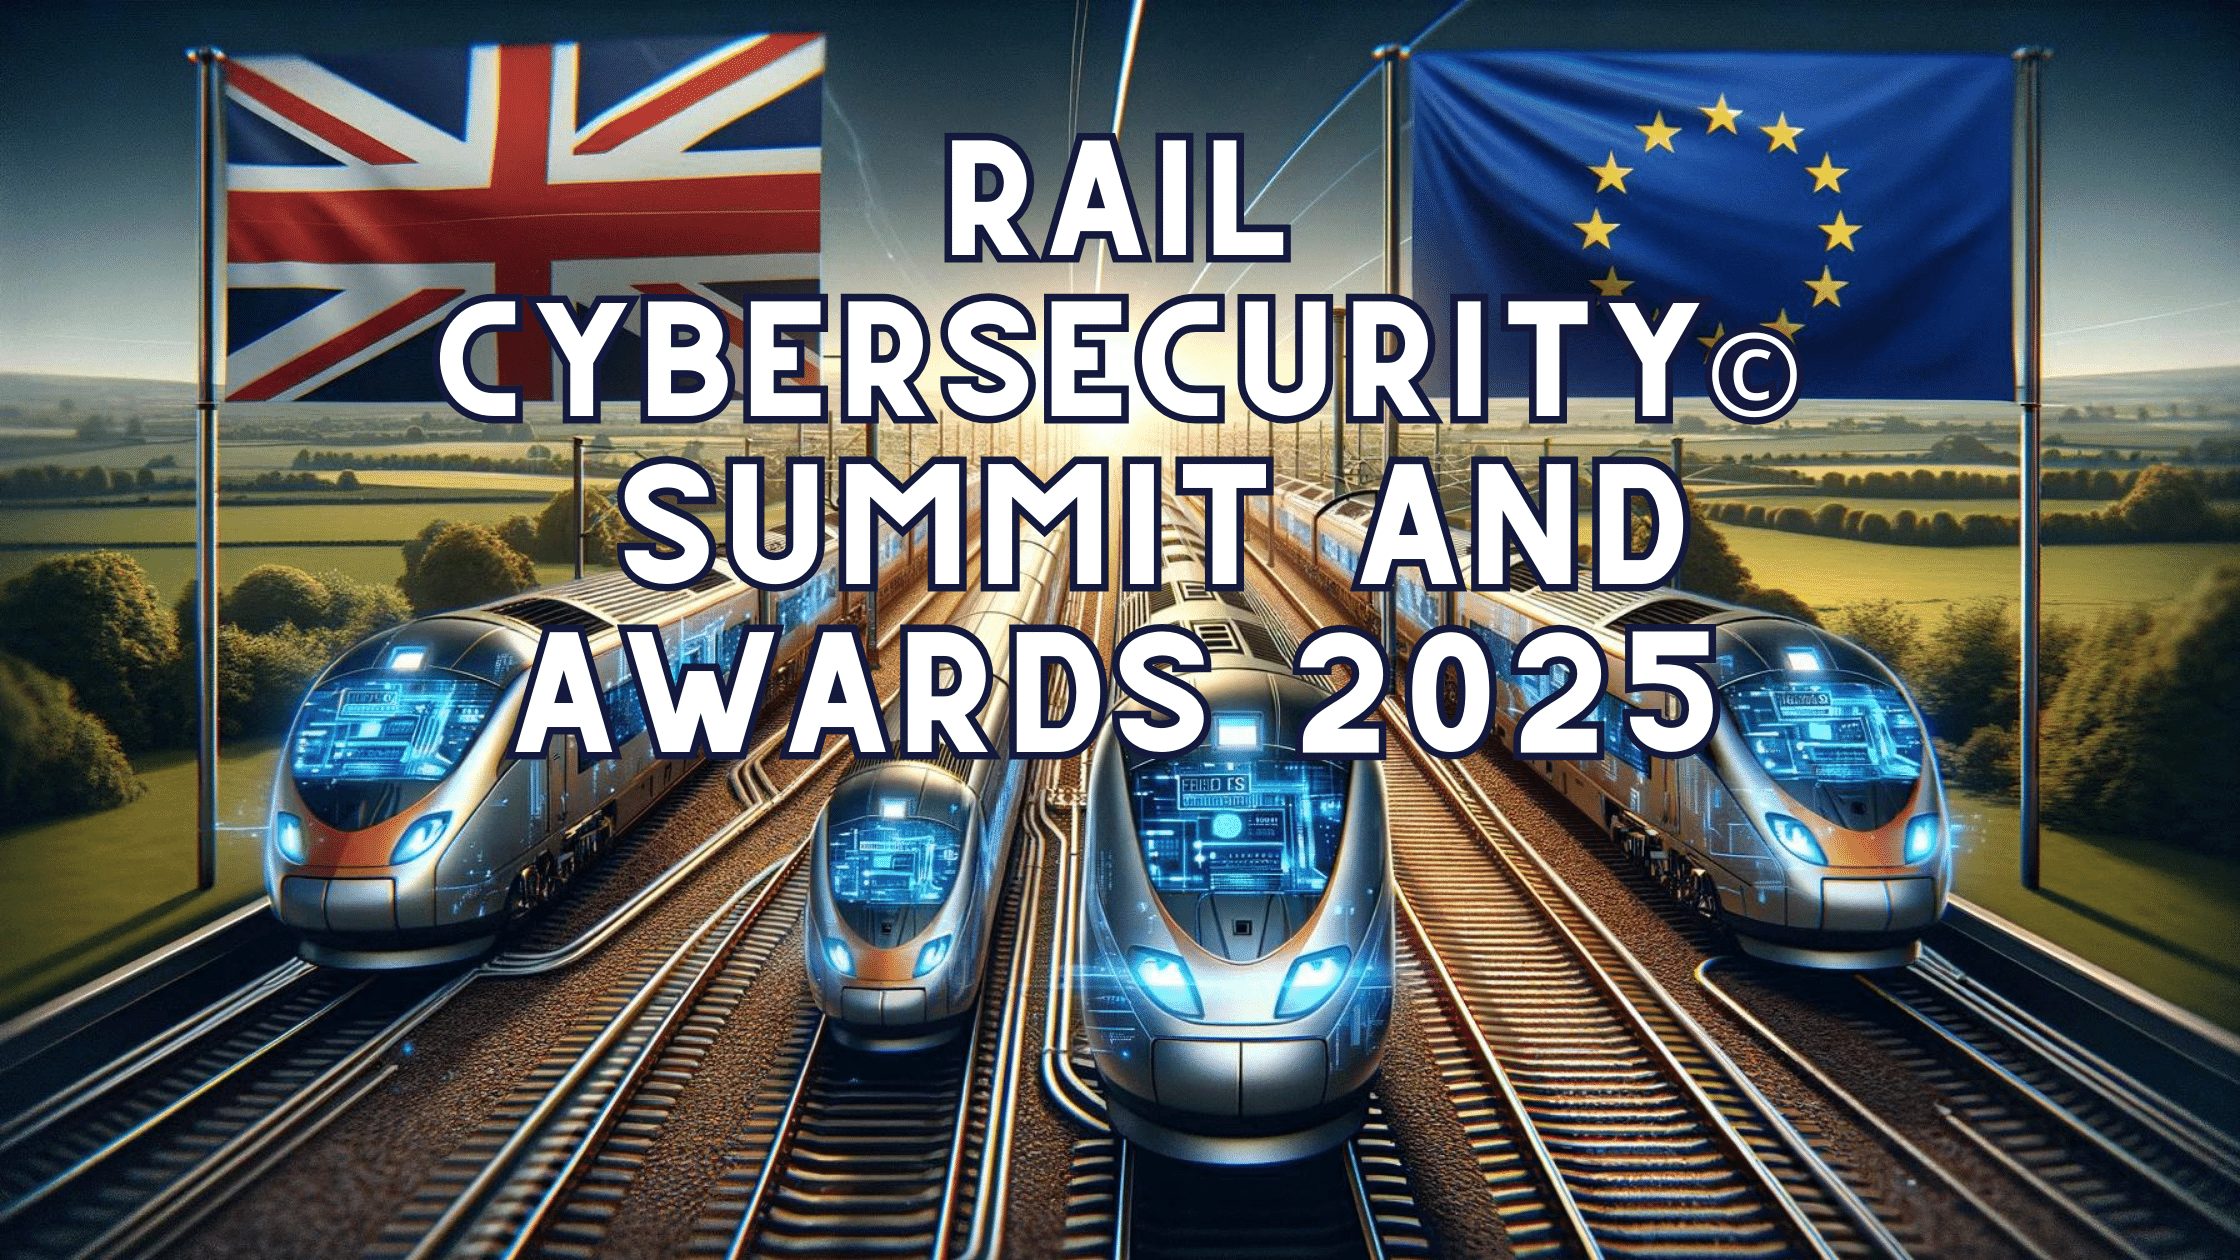 Railway Cybersecurity Summit conference and awards Cyber Senate